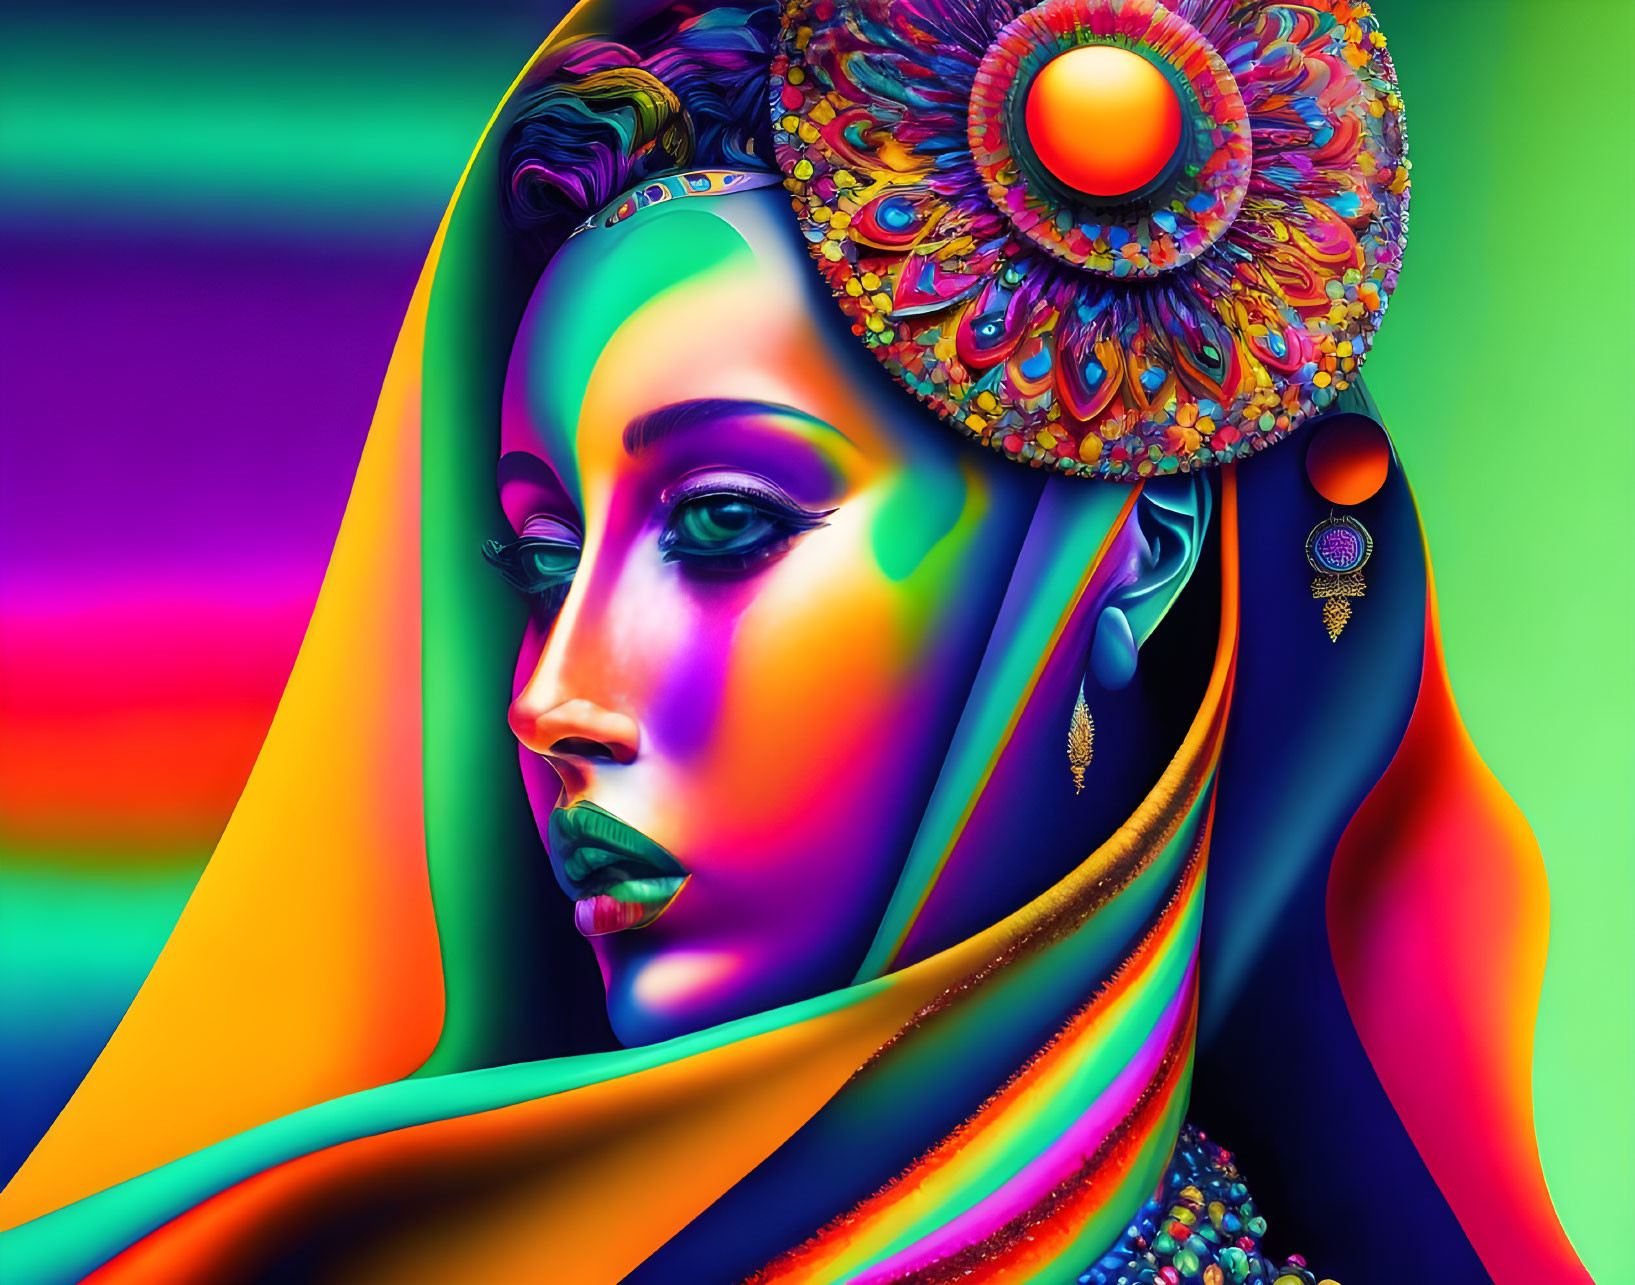 Colorful makeup and headdress on woman in vibrant digital art